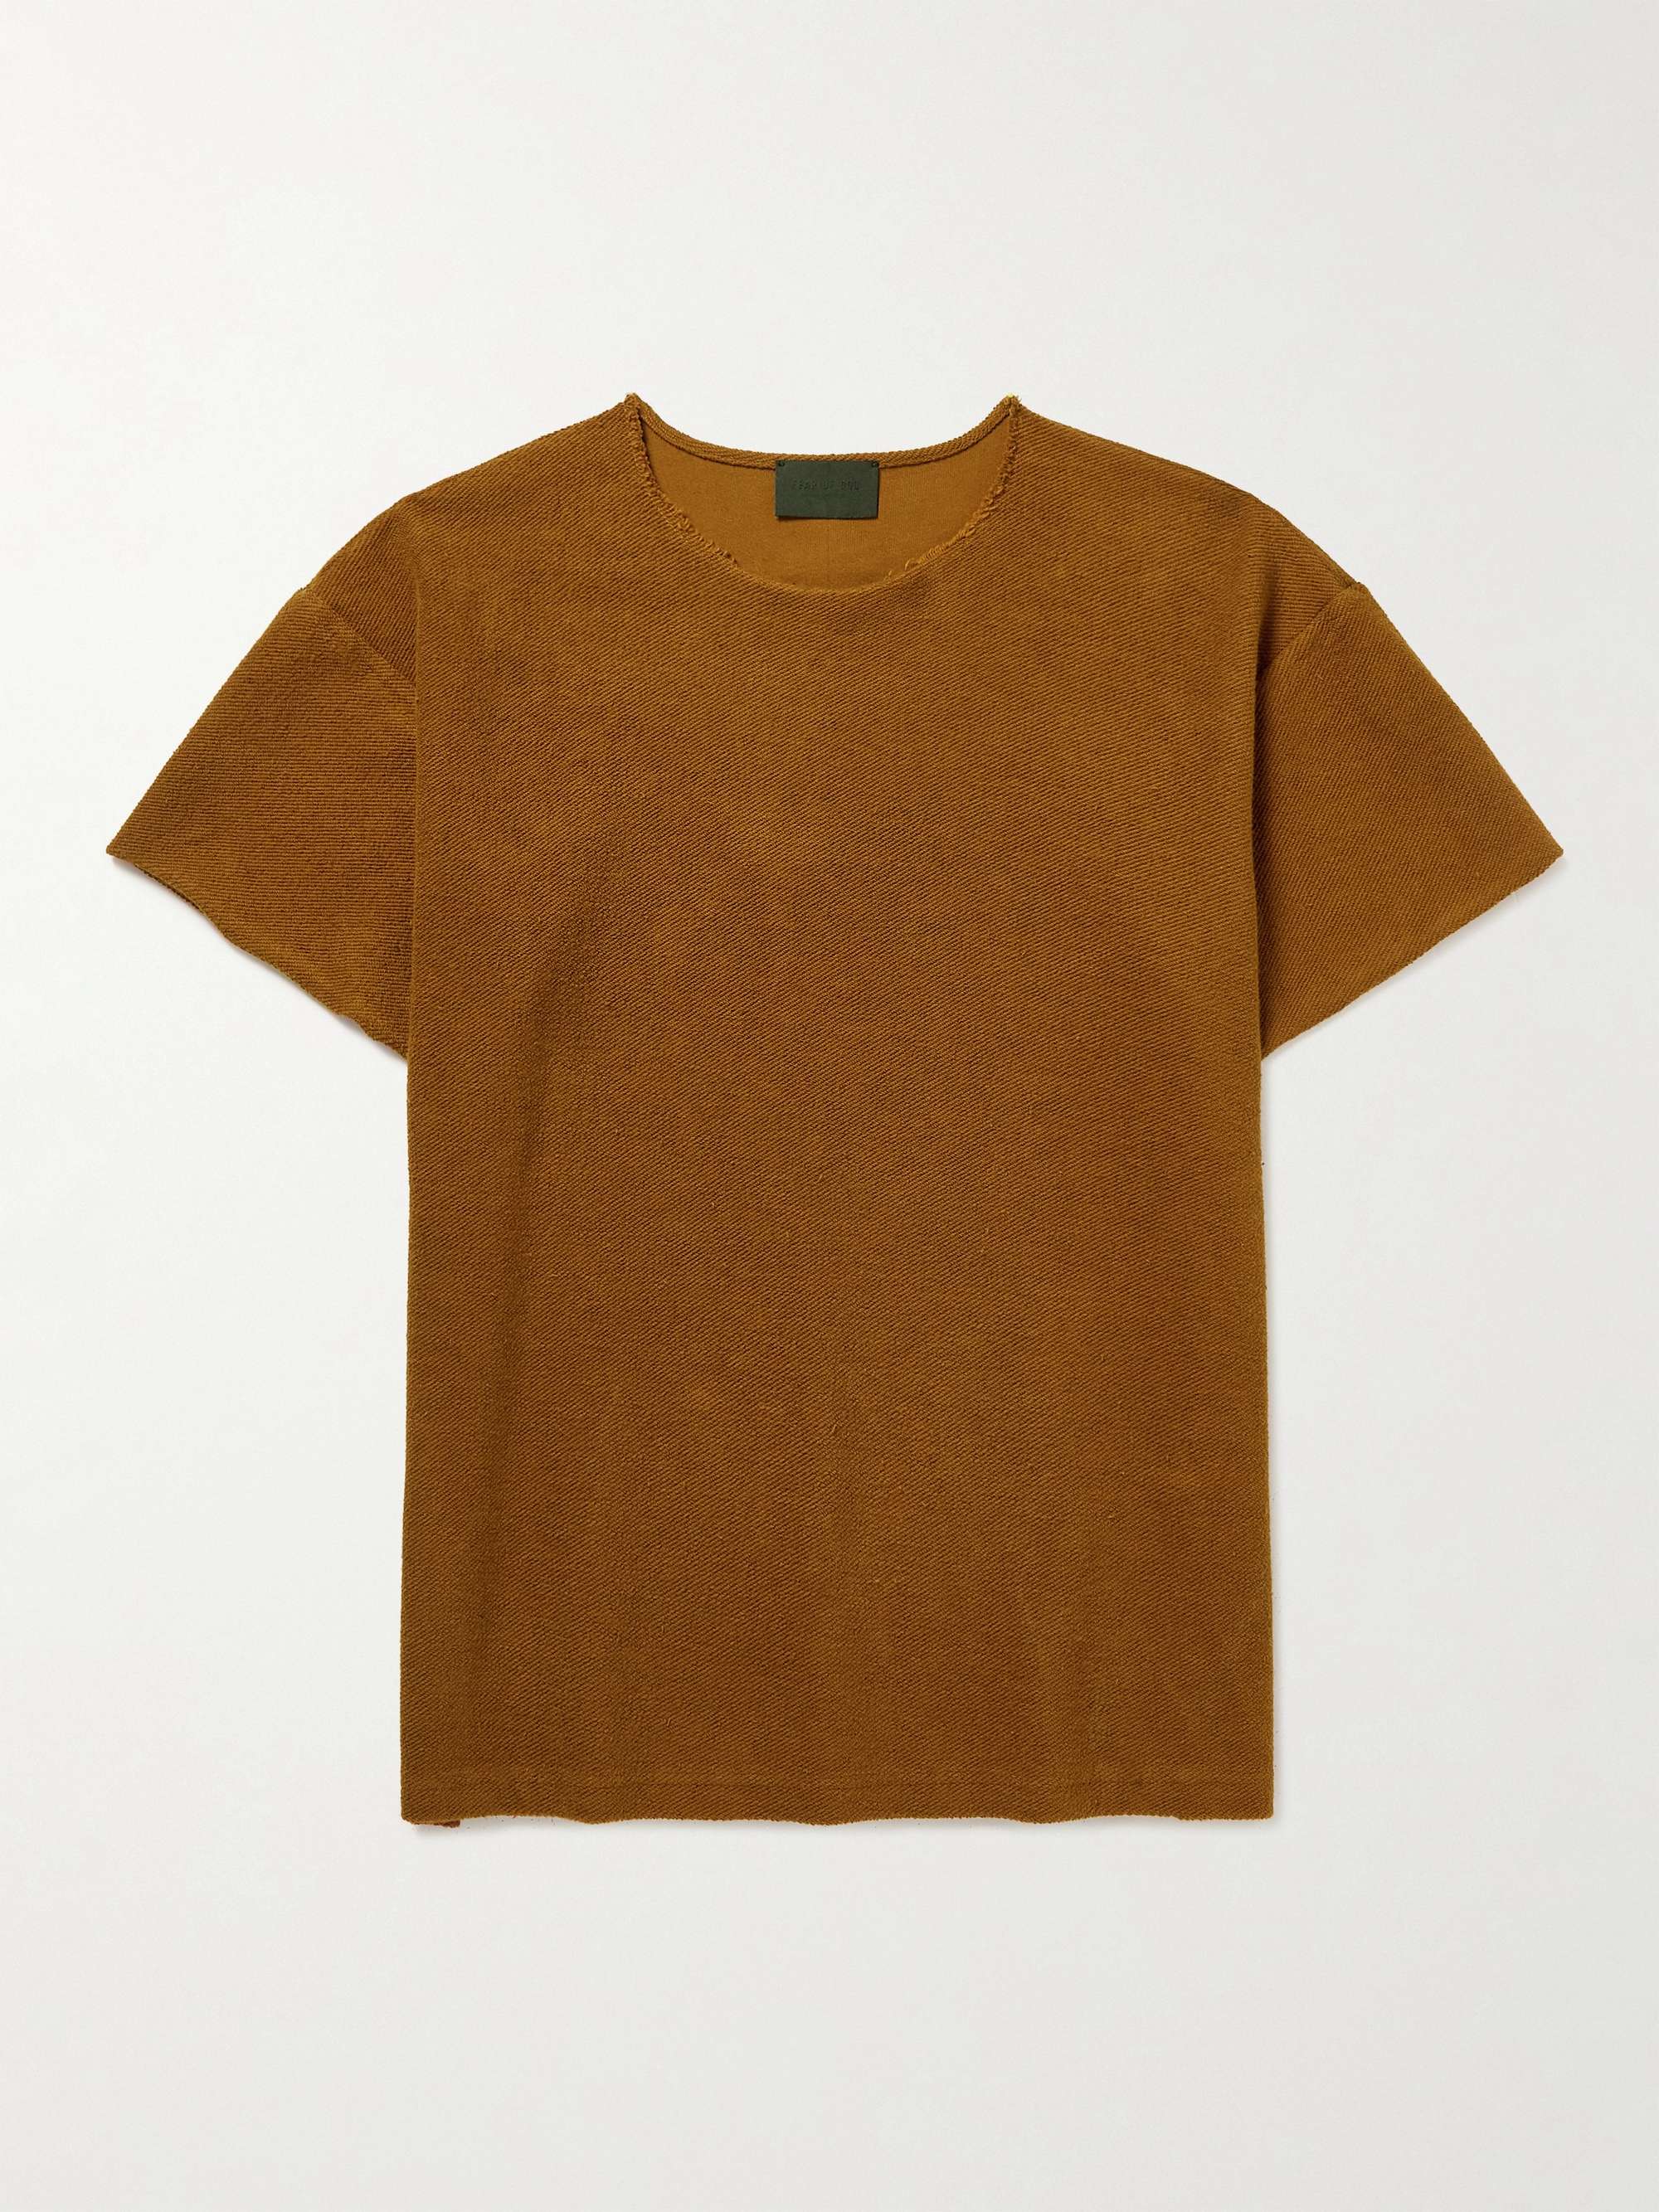 FEAR OF GOD Distressed Cotton-Terry T-Shirt